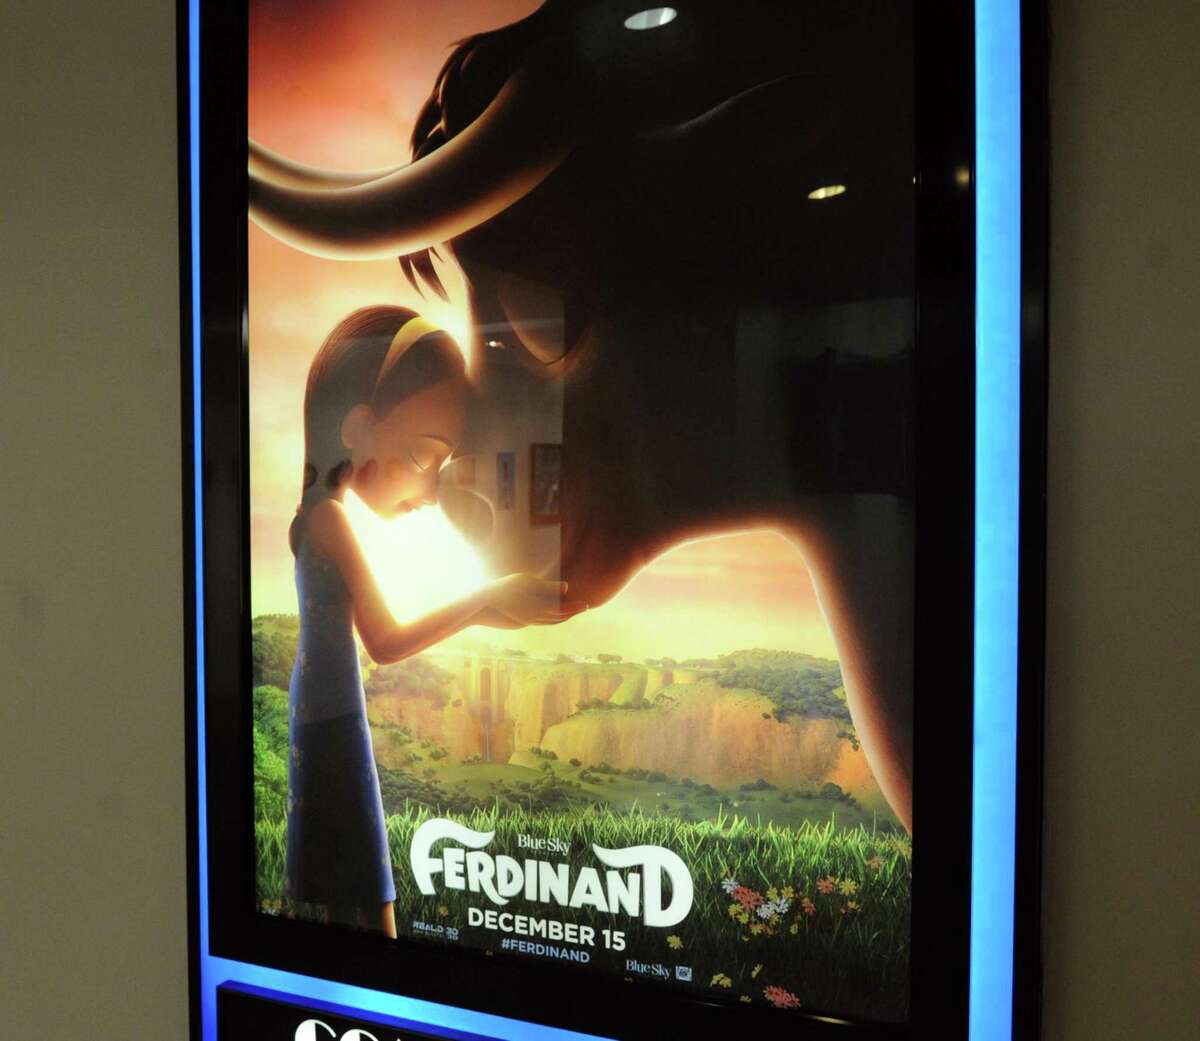 A digital frame poster for the Oscar-nominated “Ferdinand” in November 2017 at Blue Sky Studios in Greenwich, Conn.